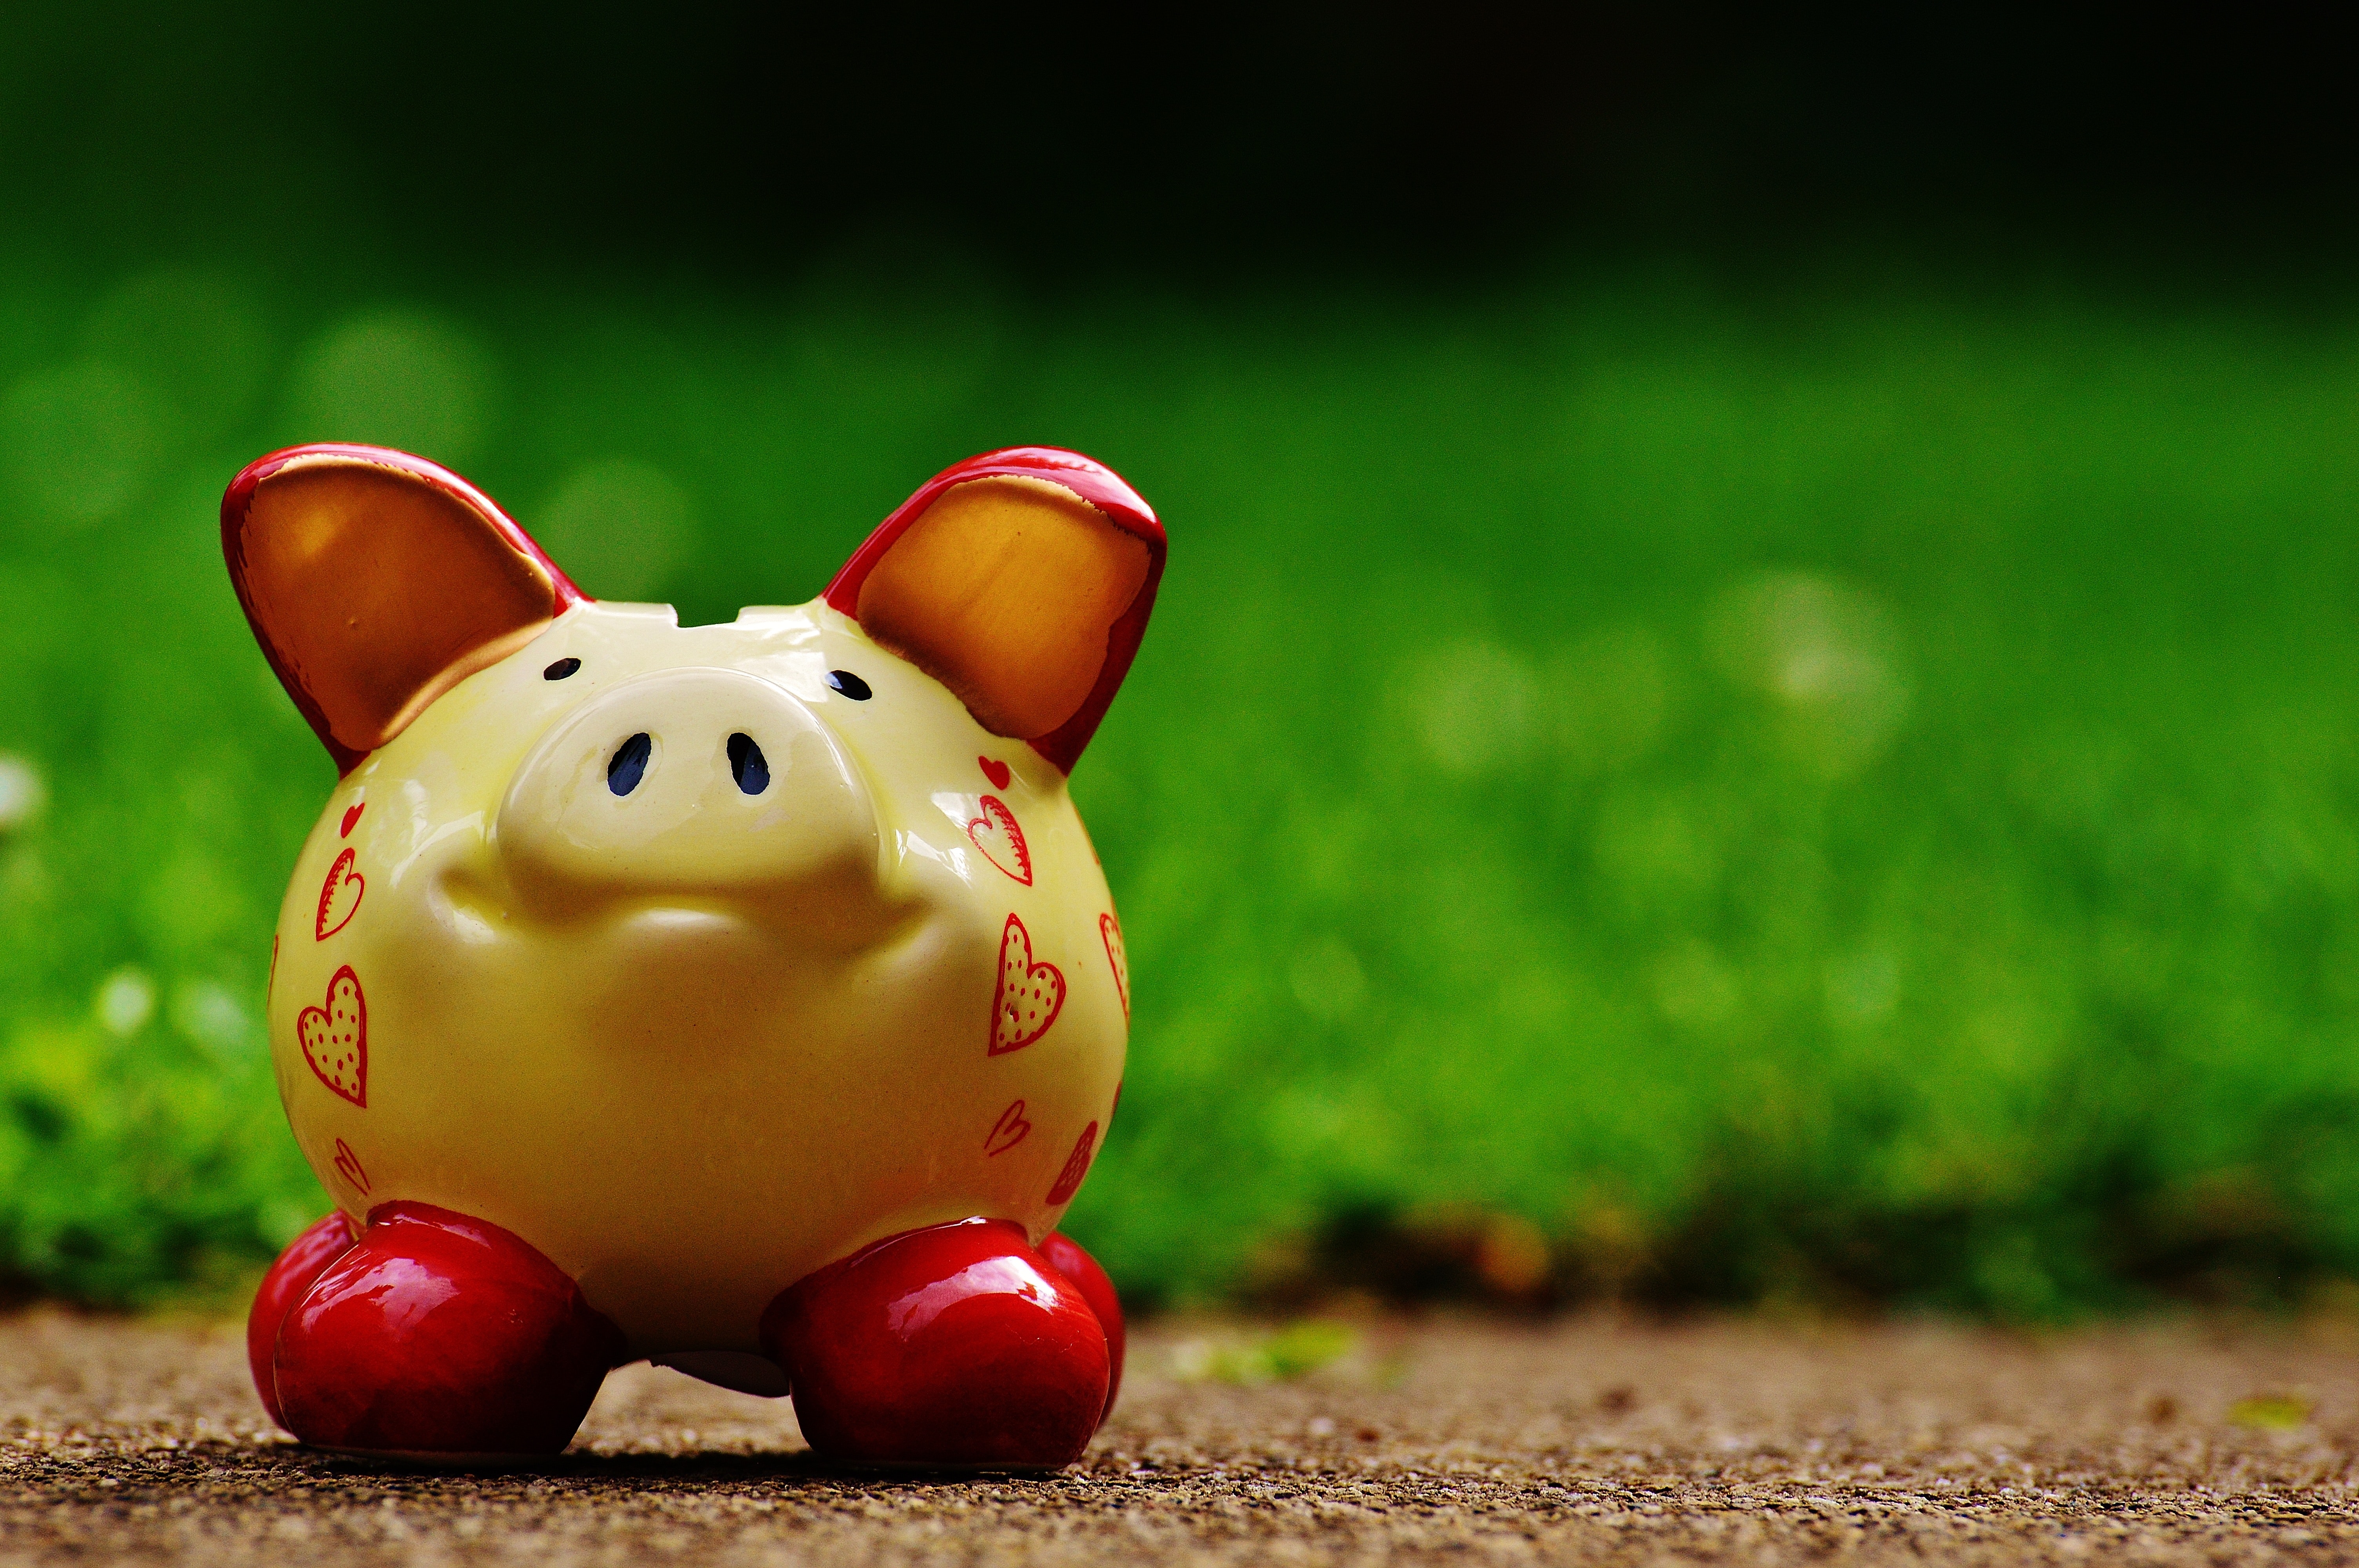 Yellow and red ceramic piggy bank on the ground in front of grass